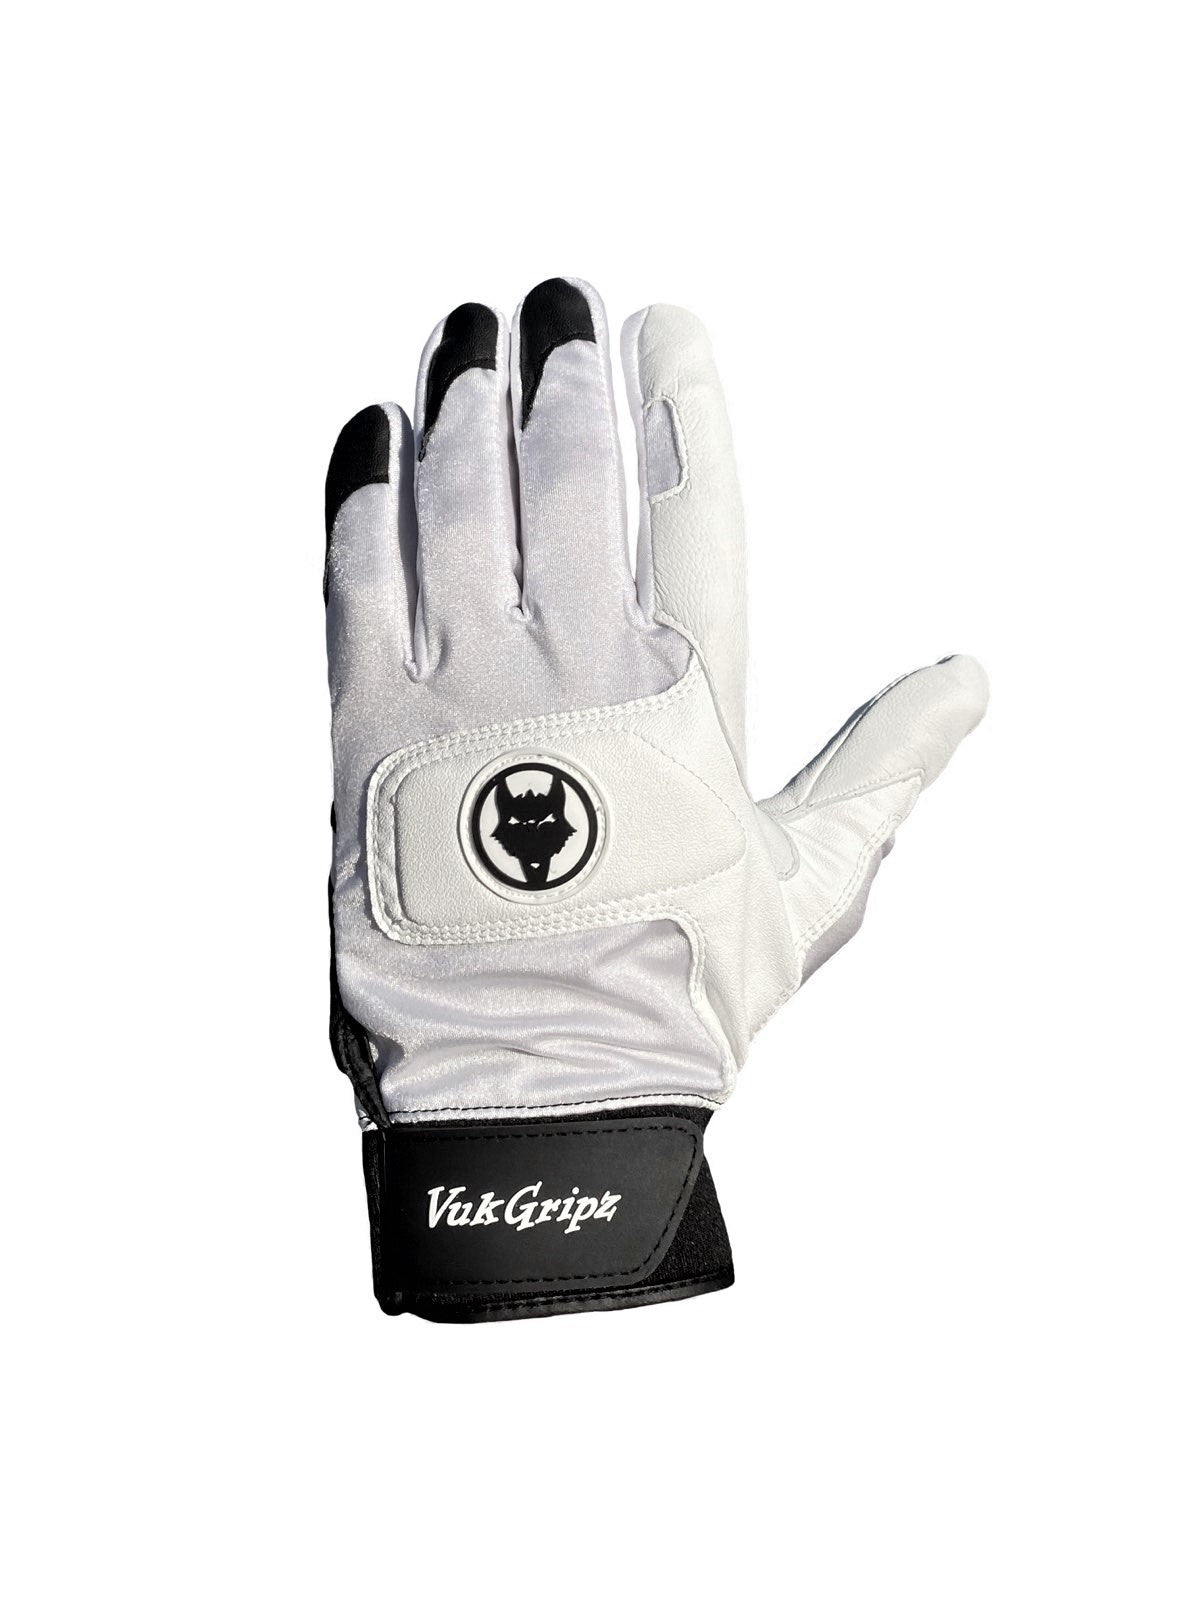 Front view VukGripz Alpha 2.0 White Batting Gloves featuring white logo and black strap